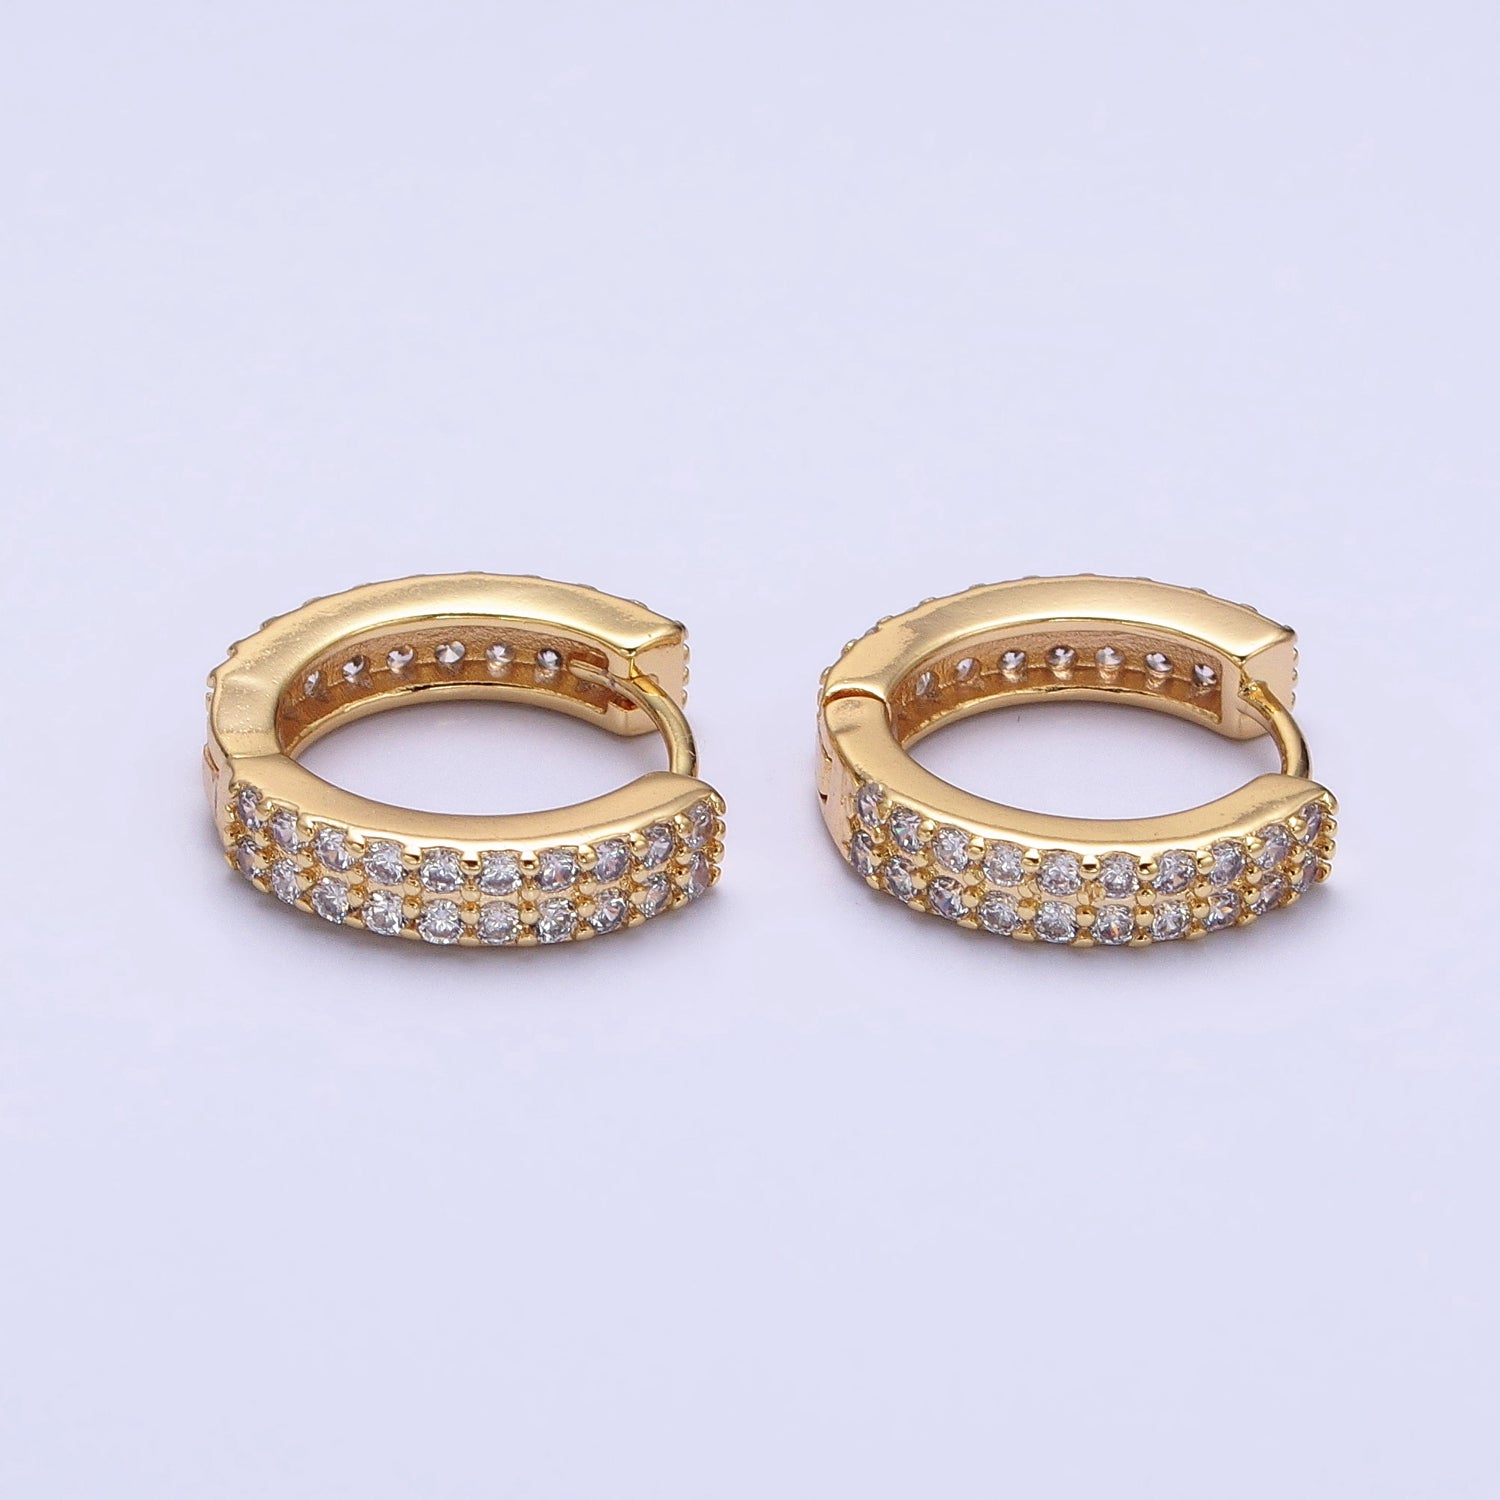 16K Gold Filled Double Sided Micro Paved CZ 16.5mm Huggie Hoop Earrings in Gold & Silver | AB953 AB1546